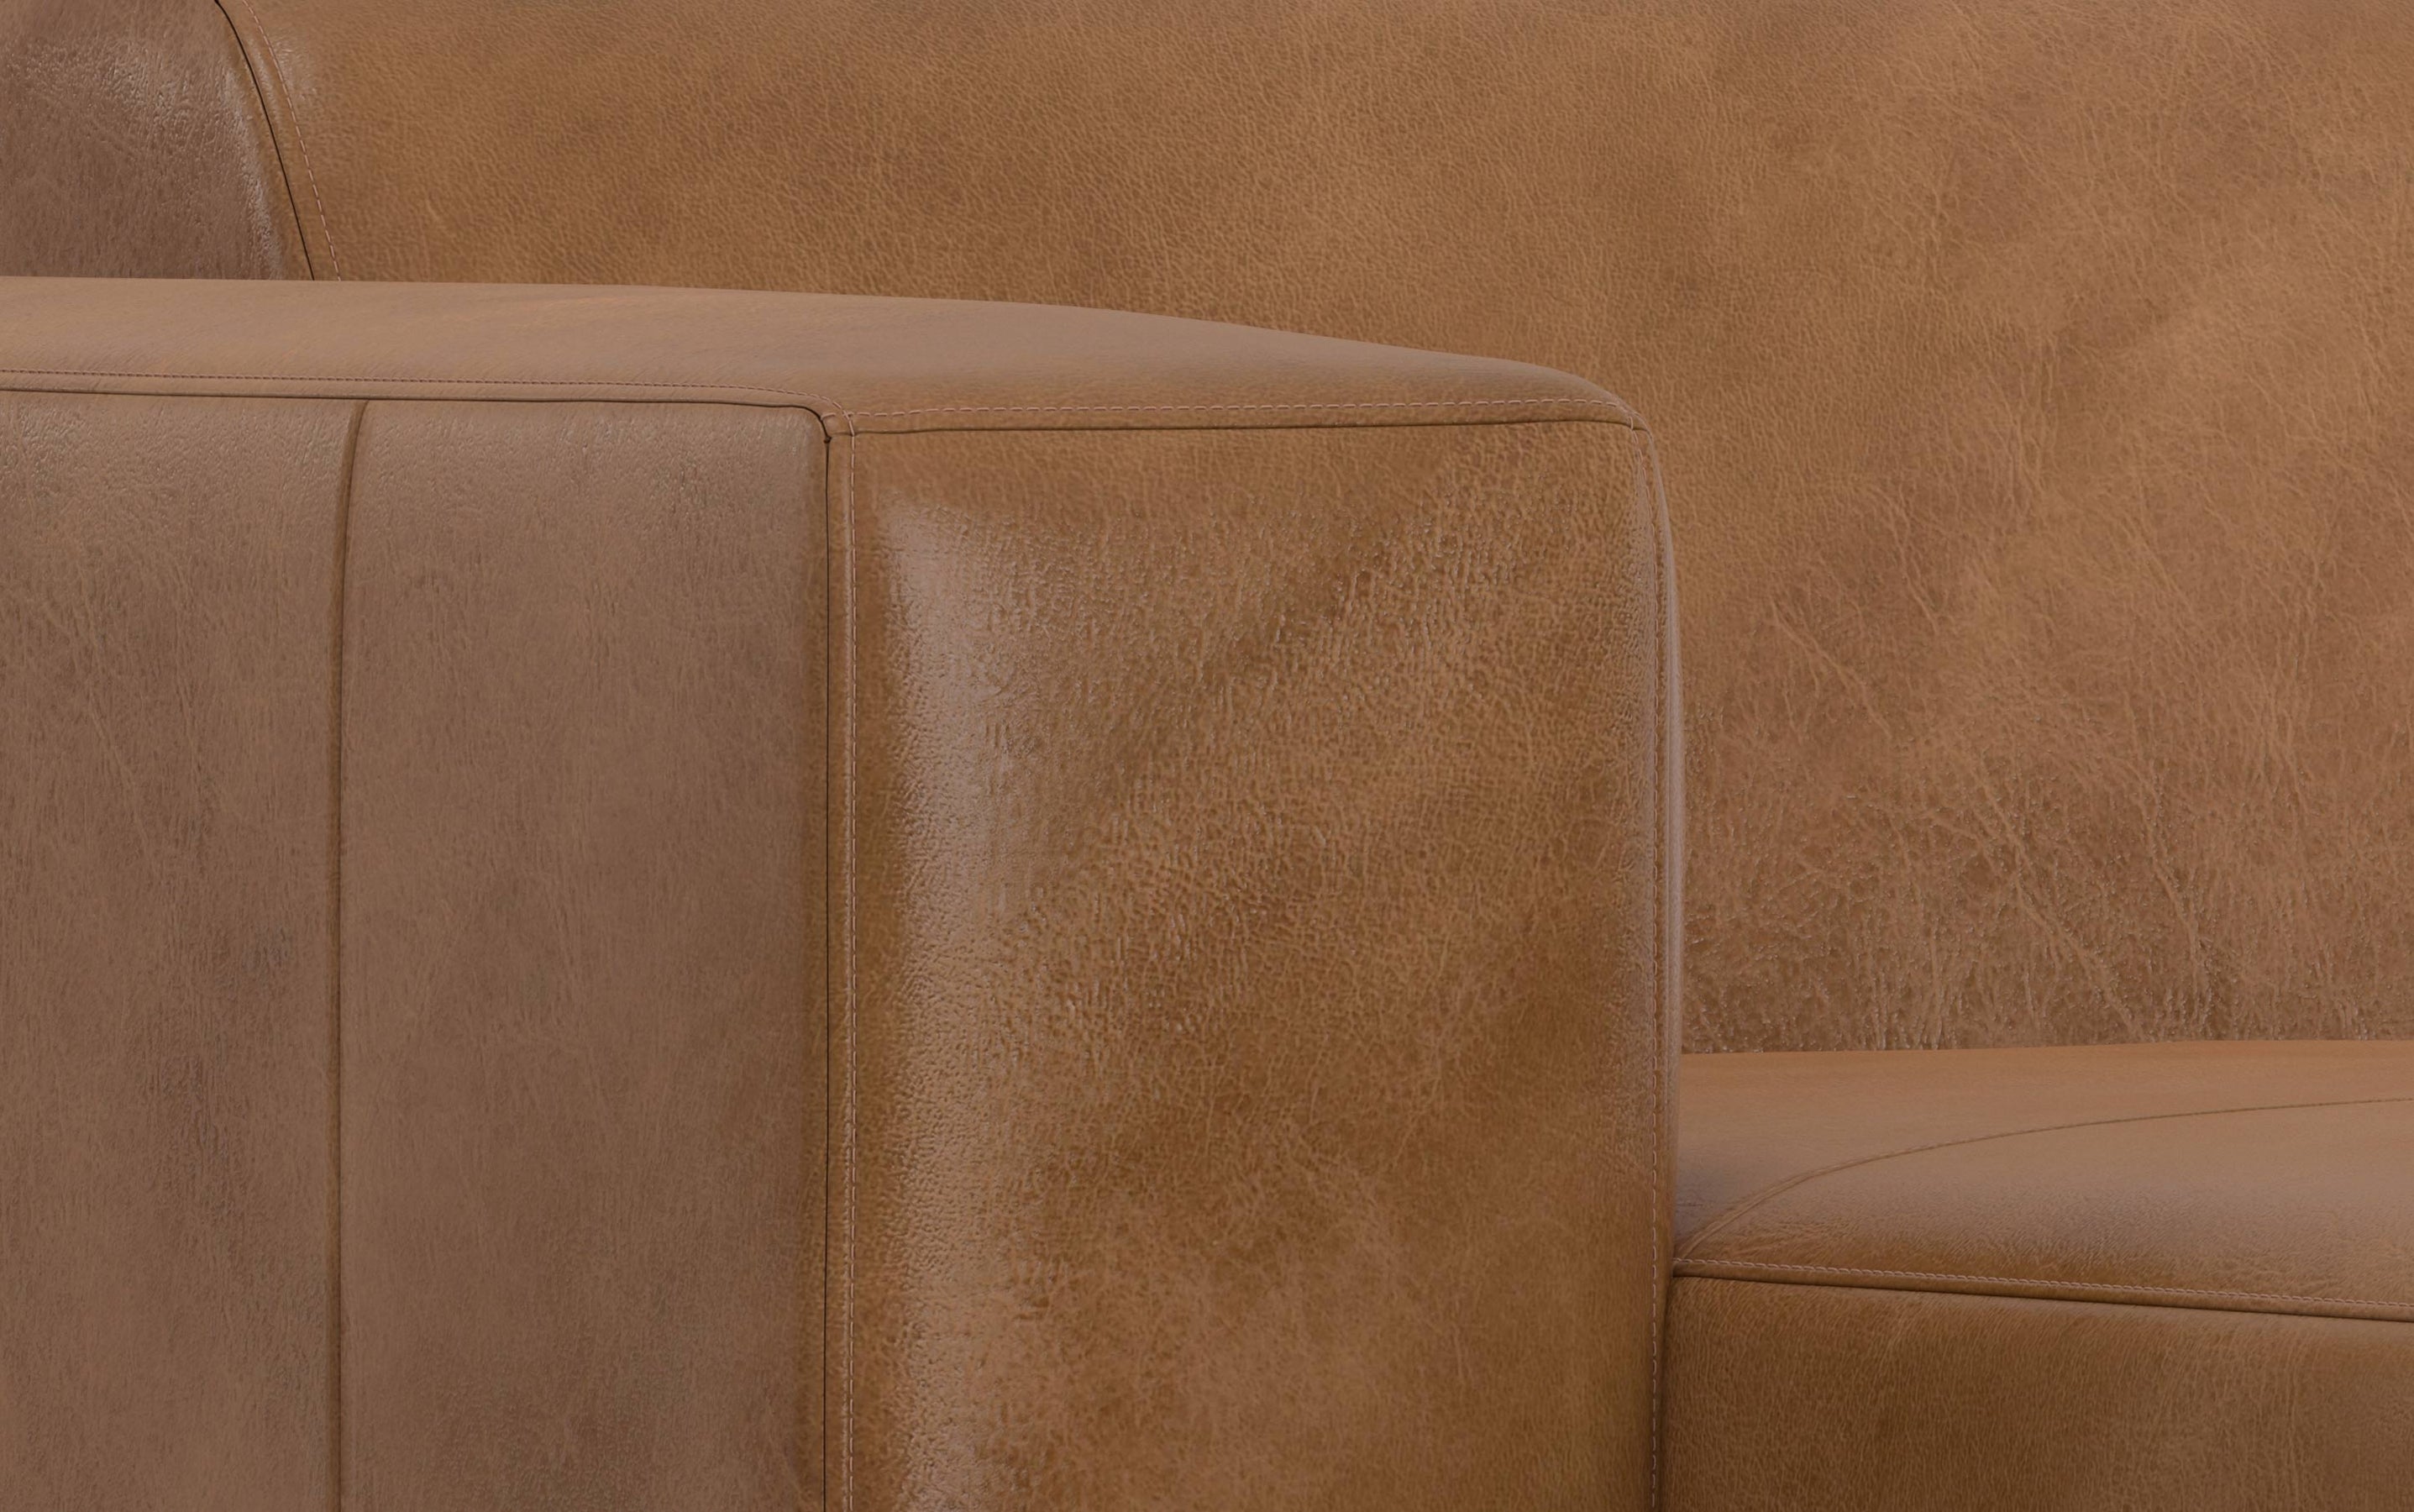 Caramel Brown Genuine Leather | Rex 2 Seater Sofa and Left Chaise in Genuine Leather